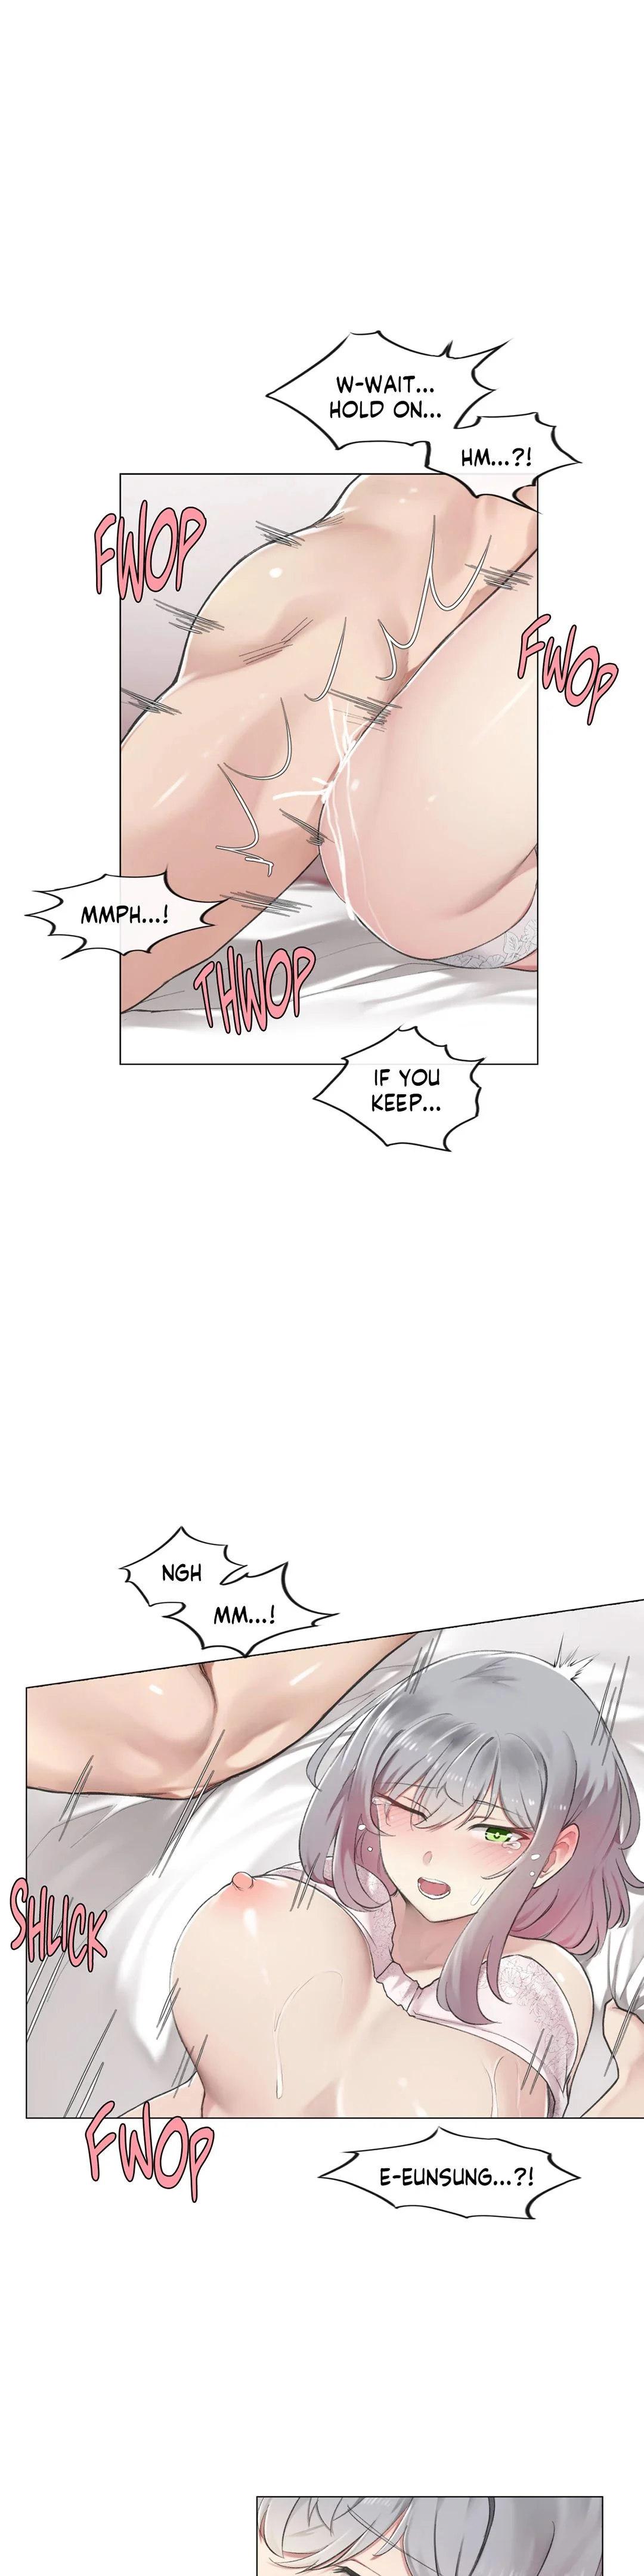 [Dumangoon, KONG_] Sexcape Room: Snap Off Ch.7/7 [English] [Manhwa PDF] Completed 117